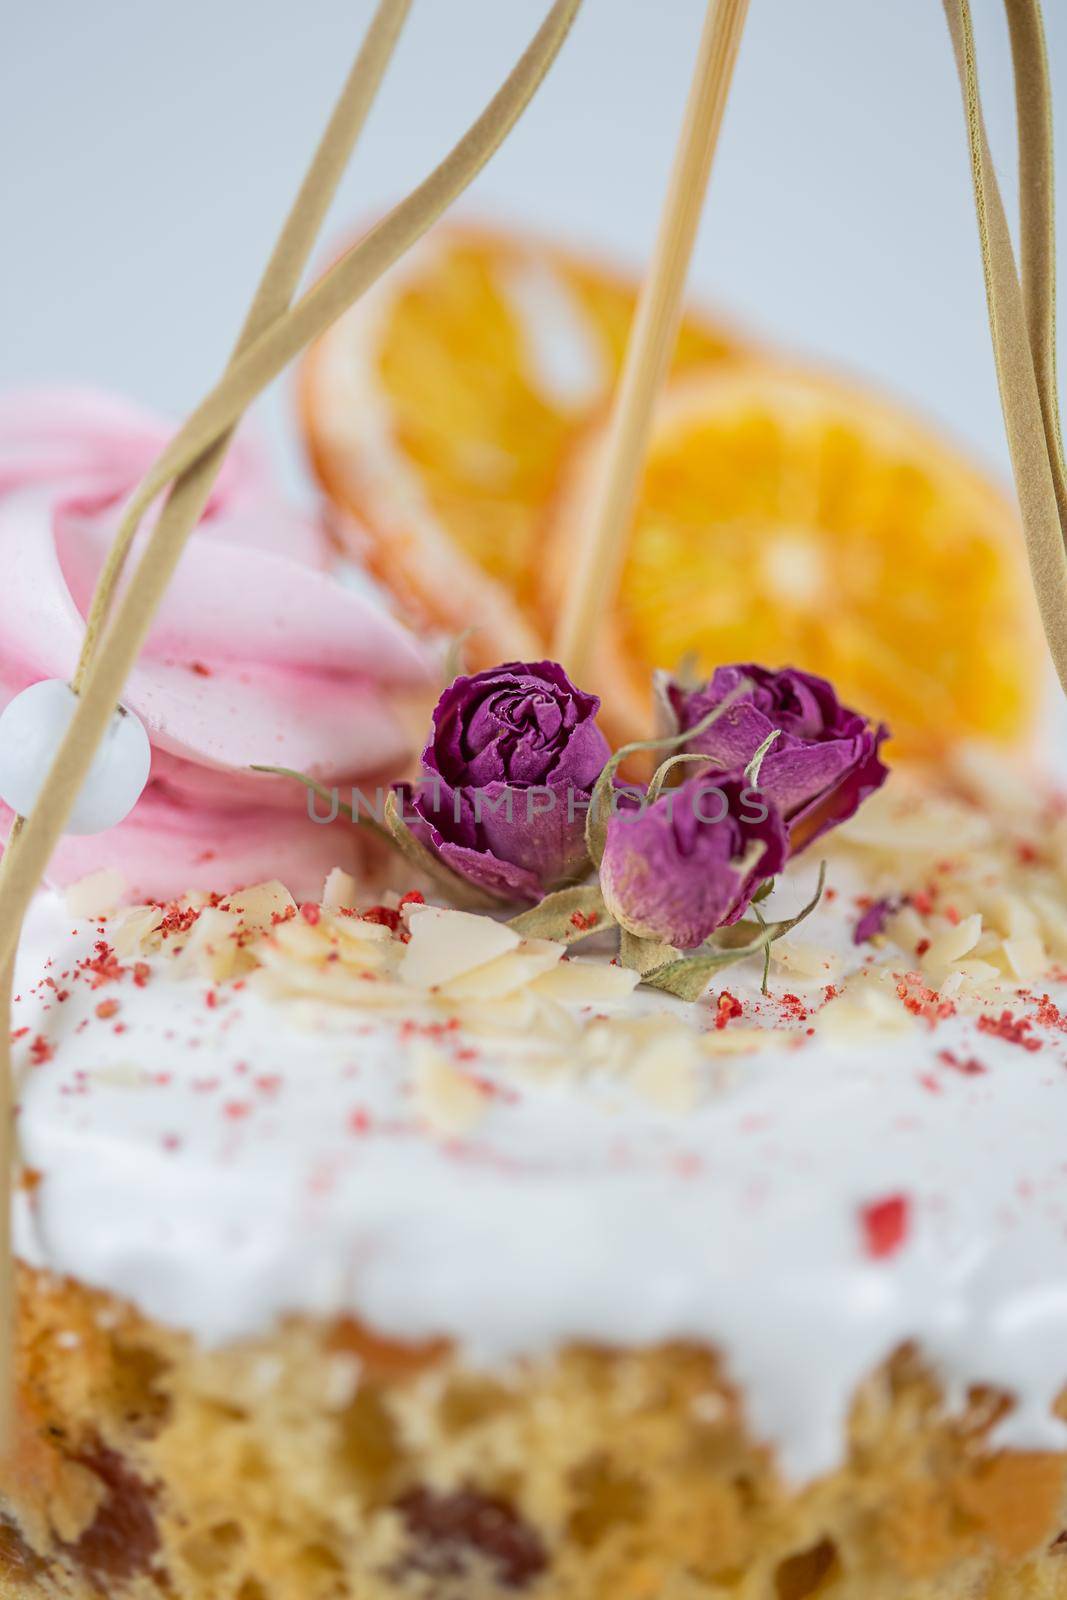 Close-up of an Easter cake. Dried oranges and roses on top of the cake by galinasharapova